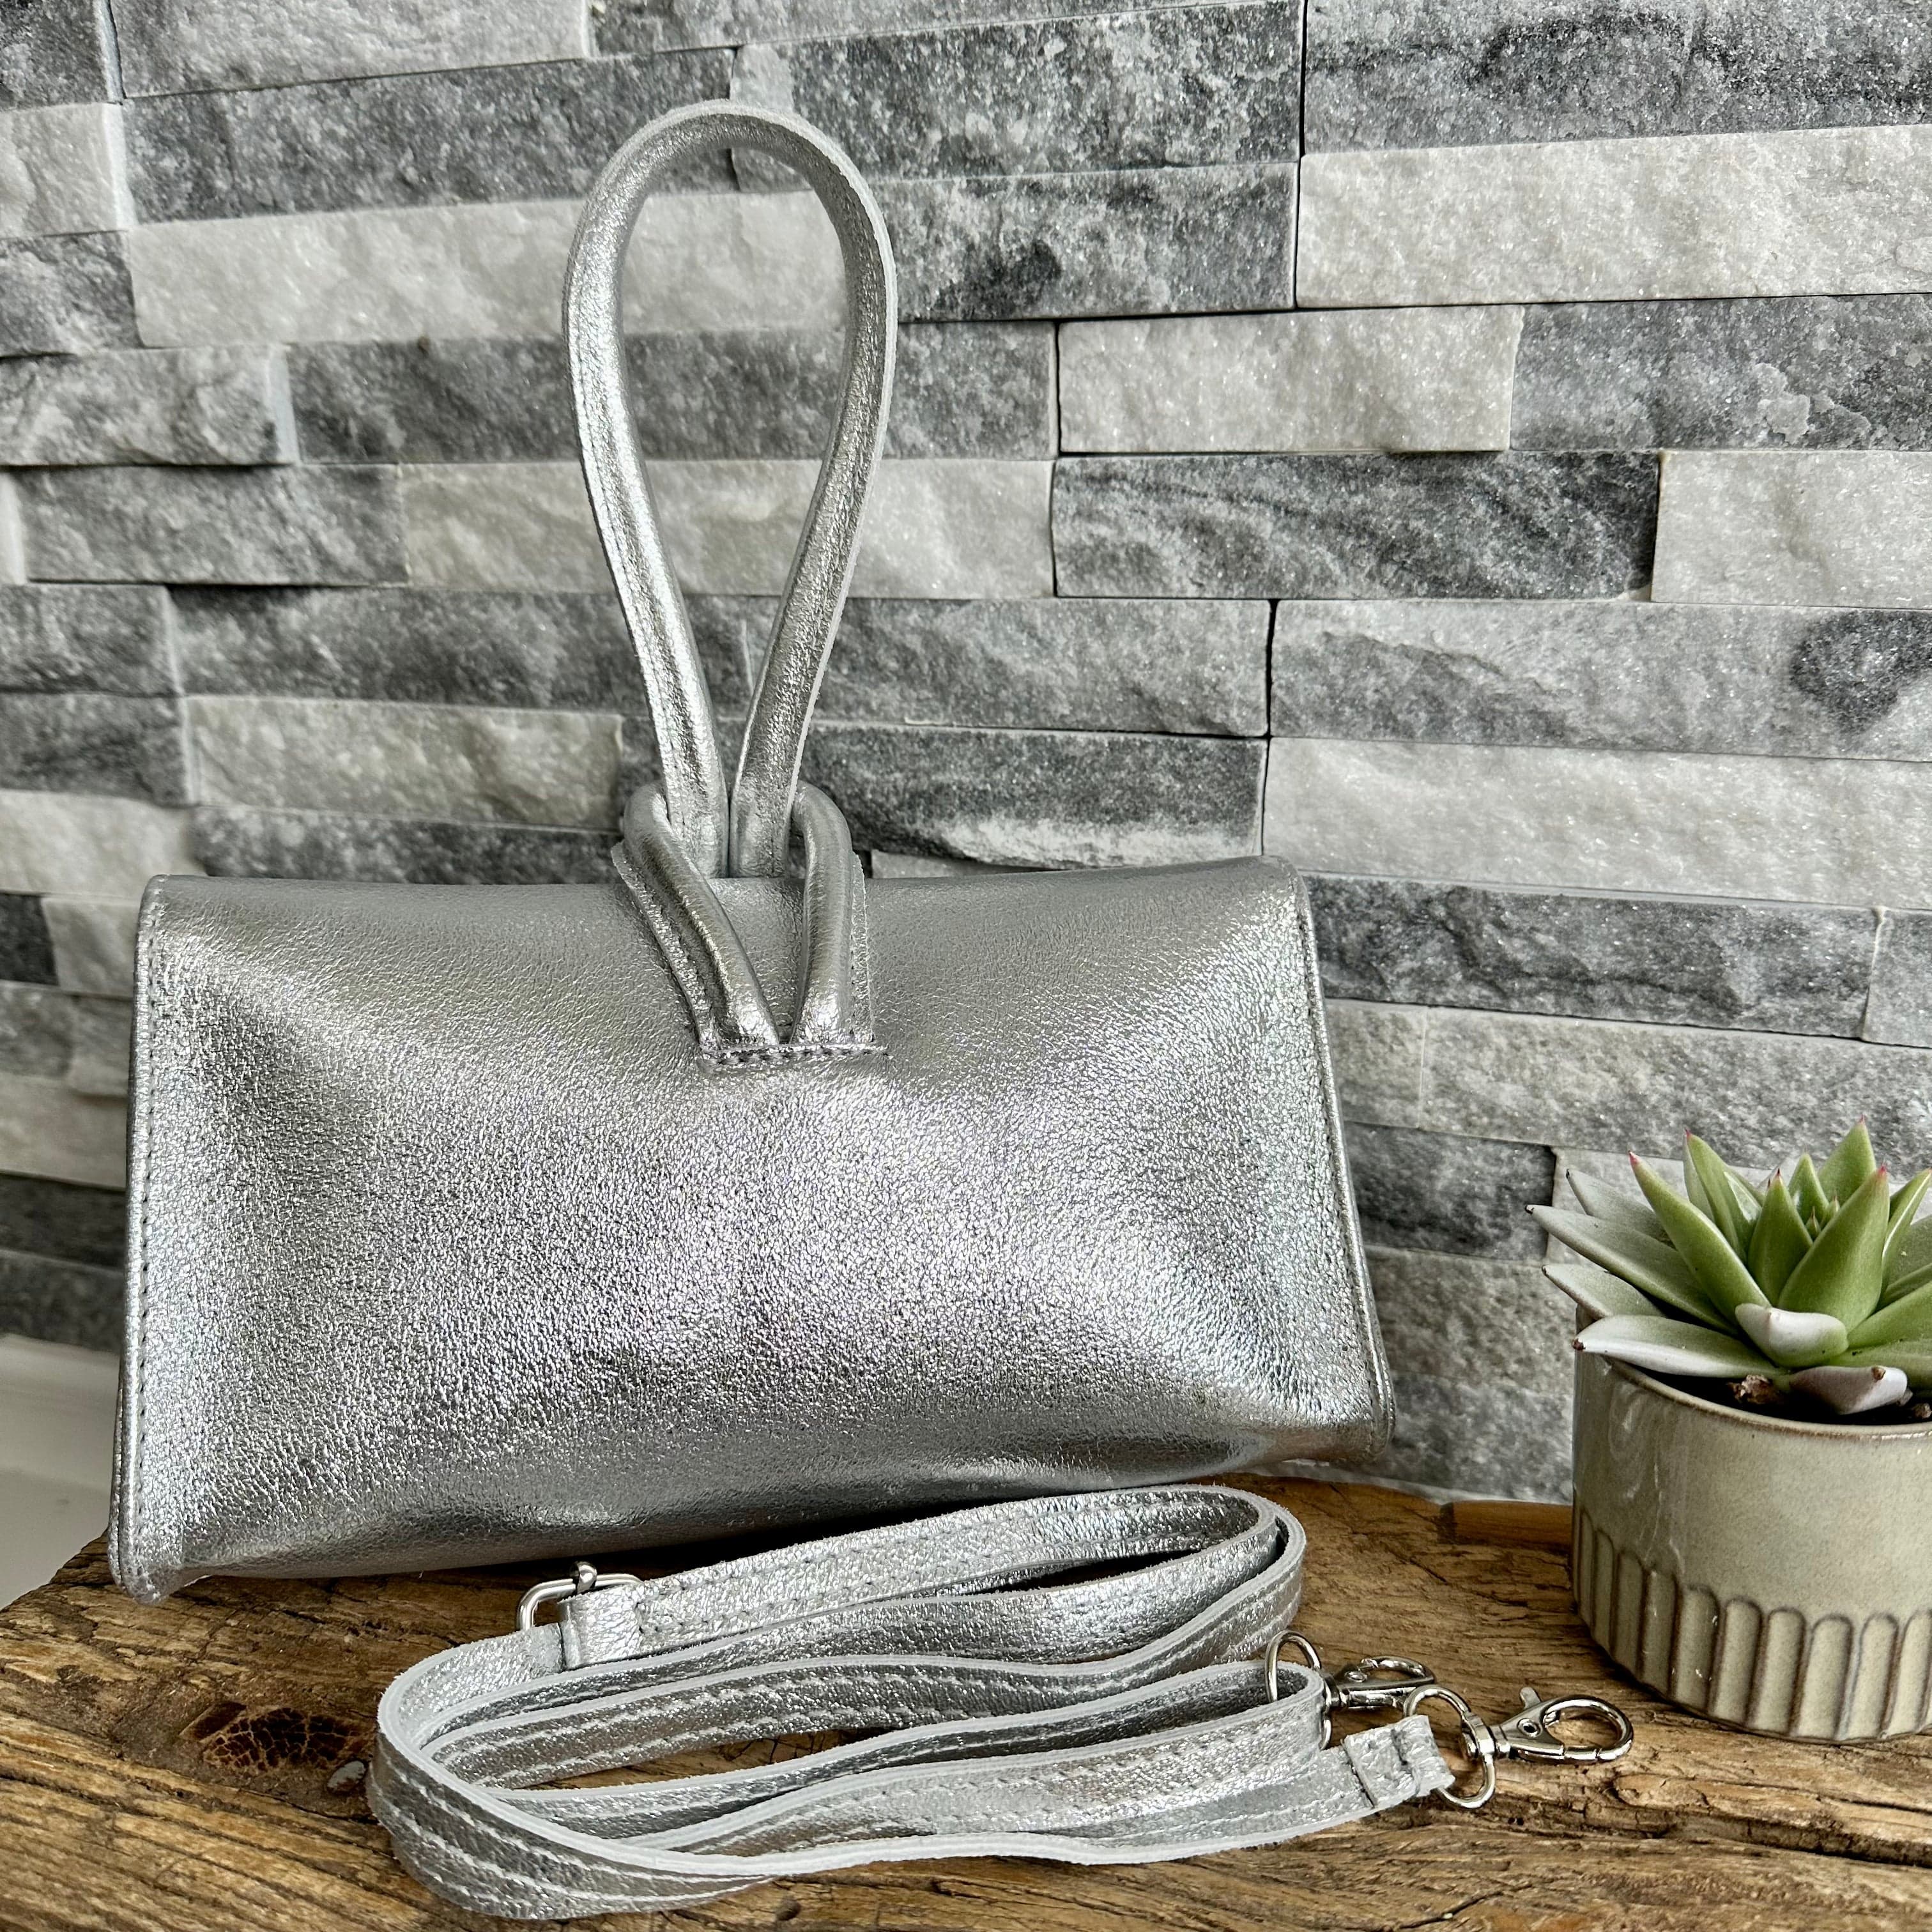 lusciousscarves Metallic Silver Clutch Bag with Loop Handle